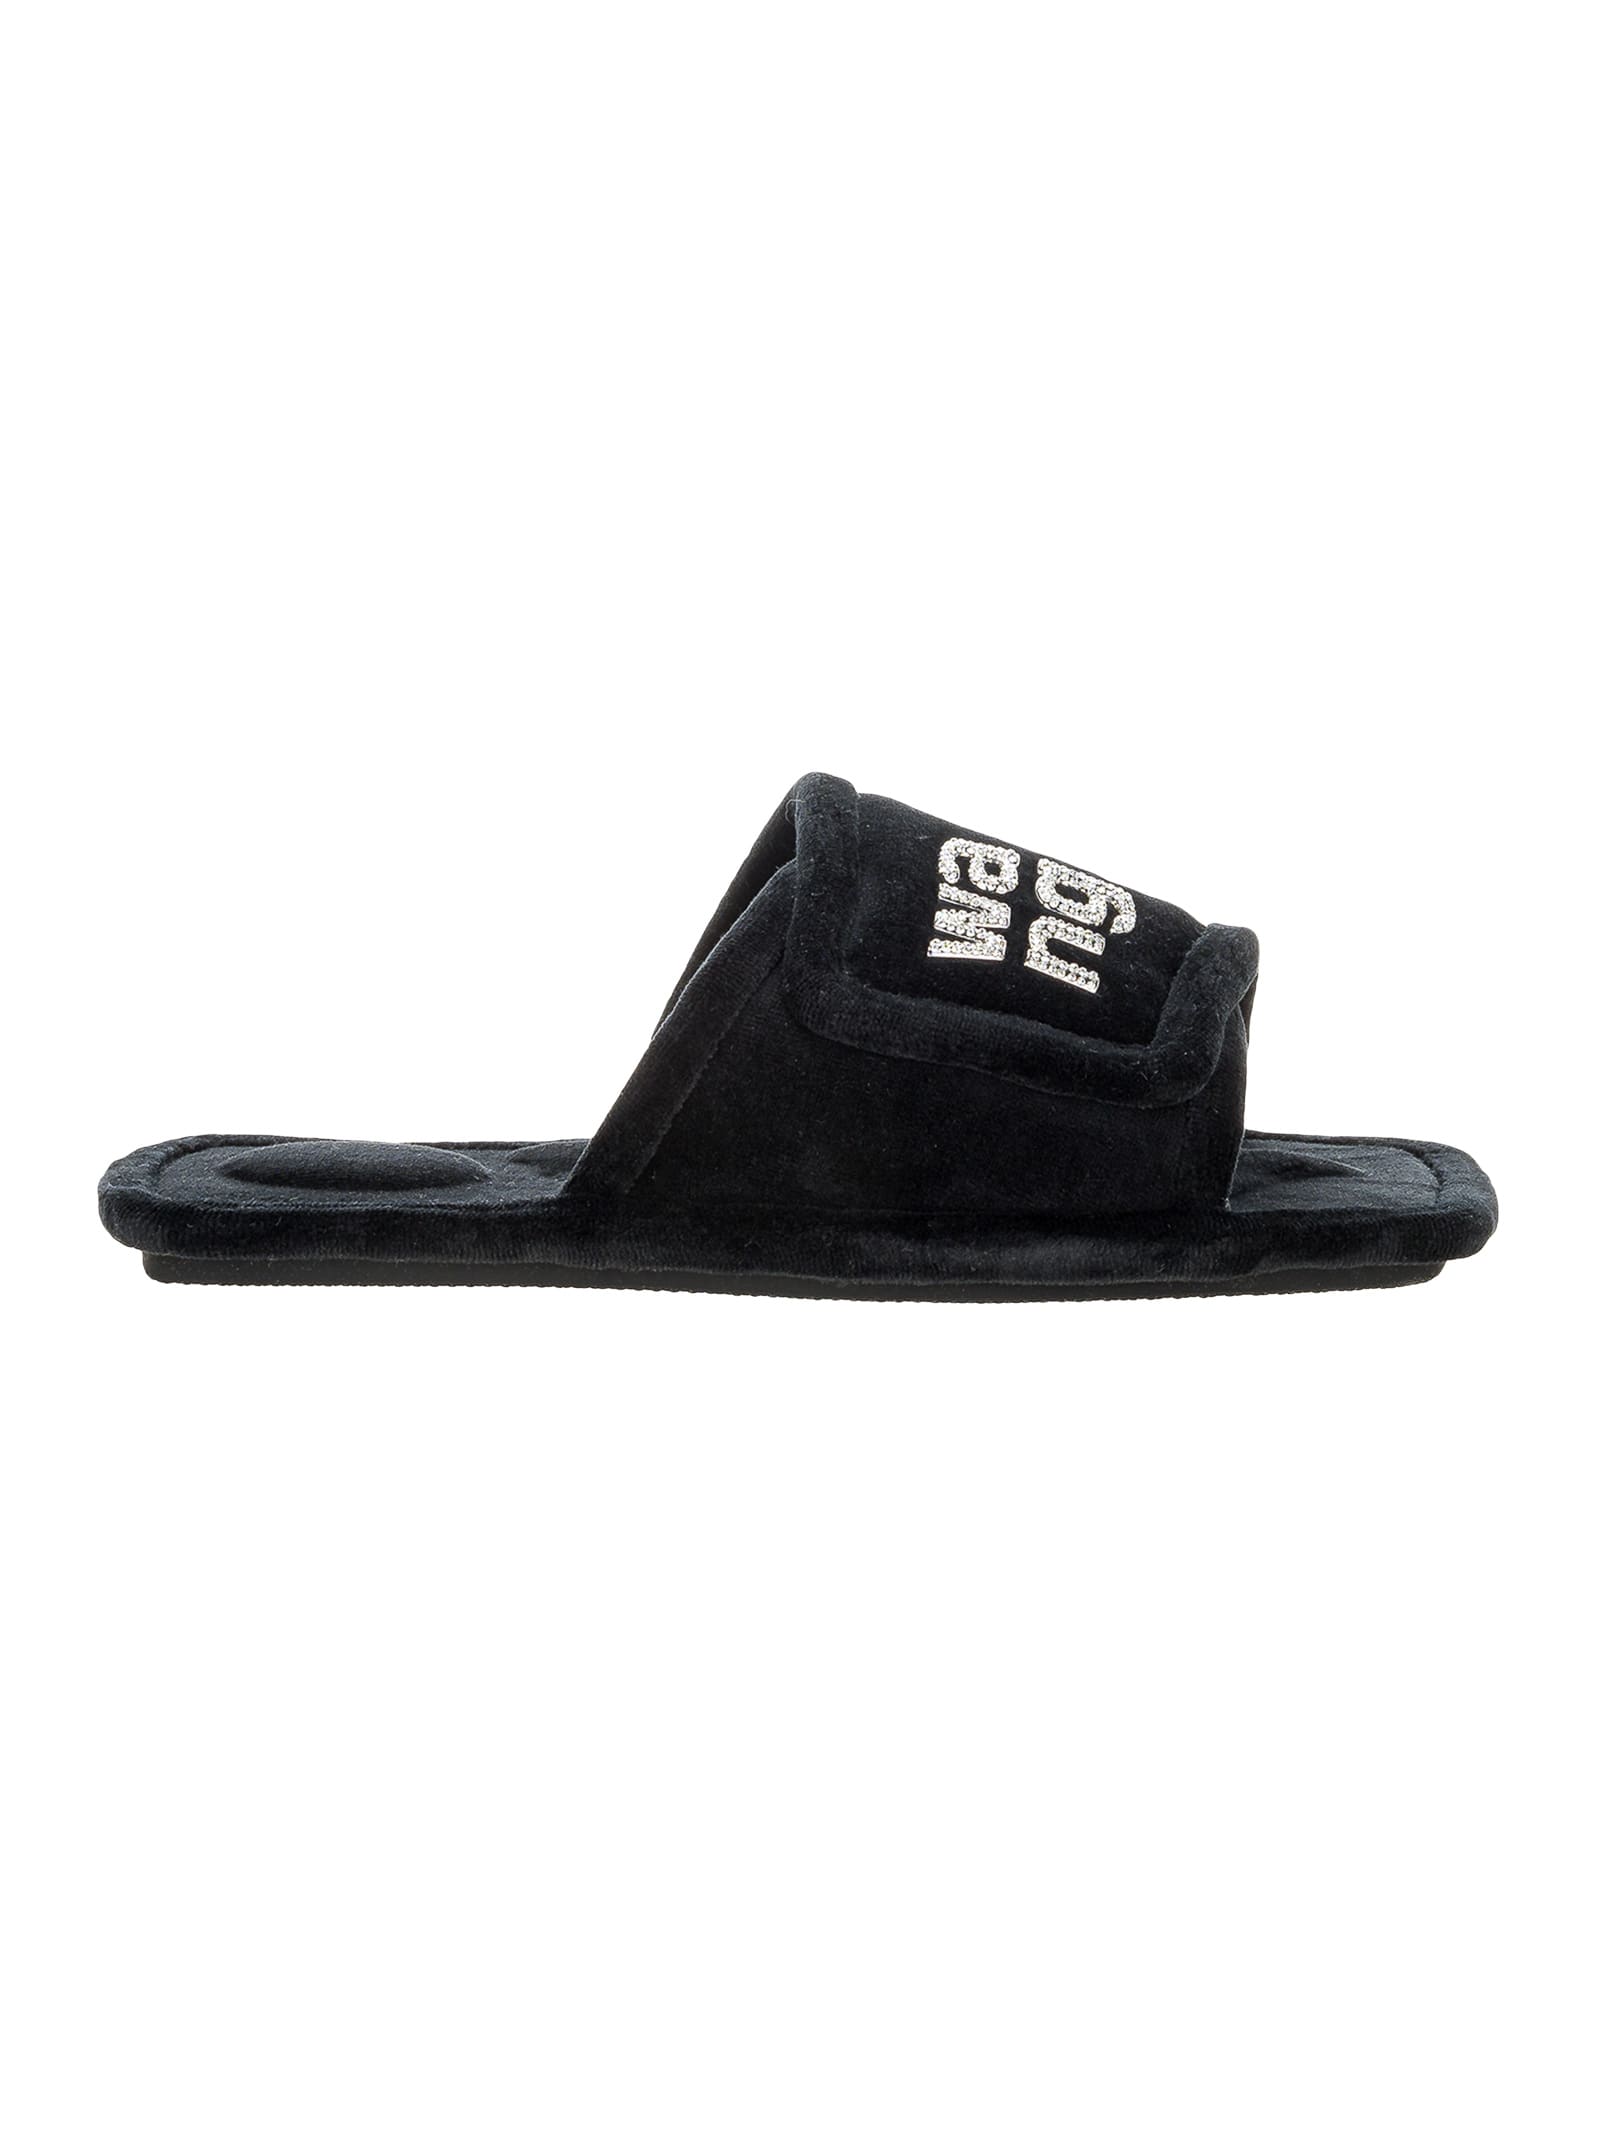 Buy Alexander Wang Lana Padded Velour Crystal Logo Slippers online, shop Alexander Wang shoes with free shipping